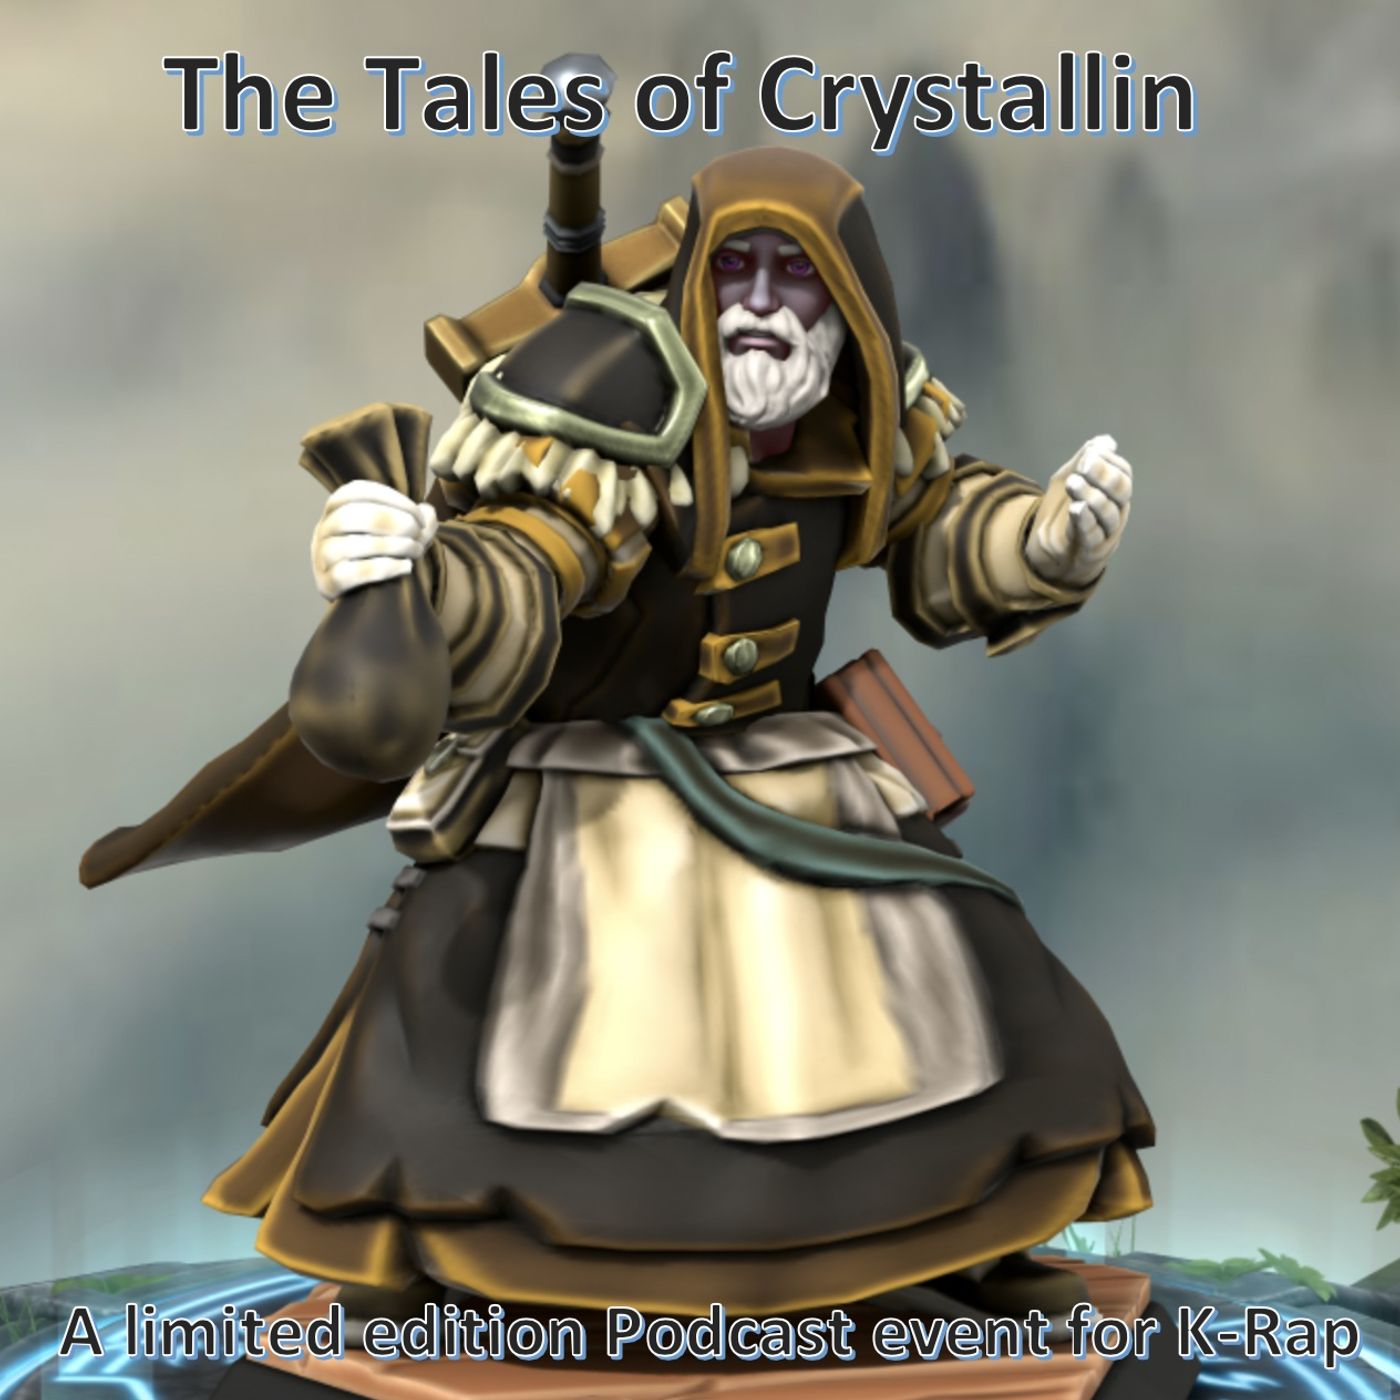 The Tales of Crystallin!